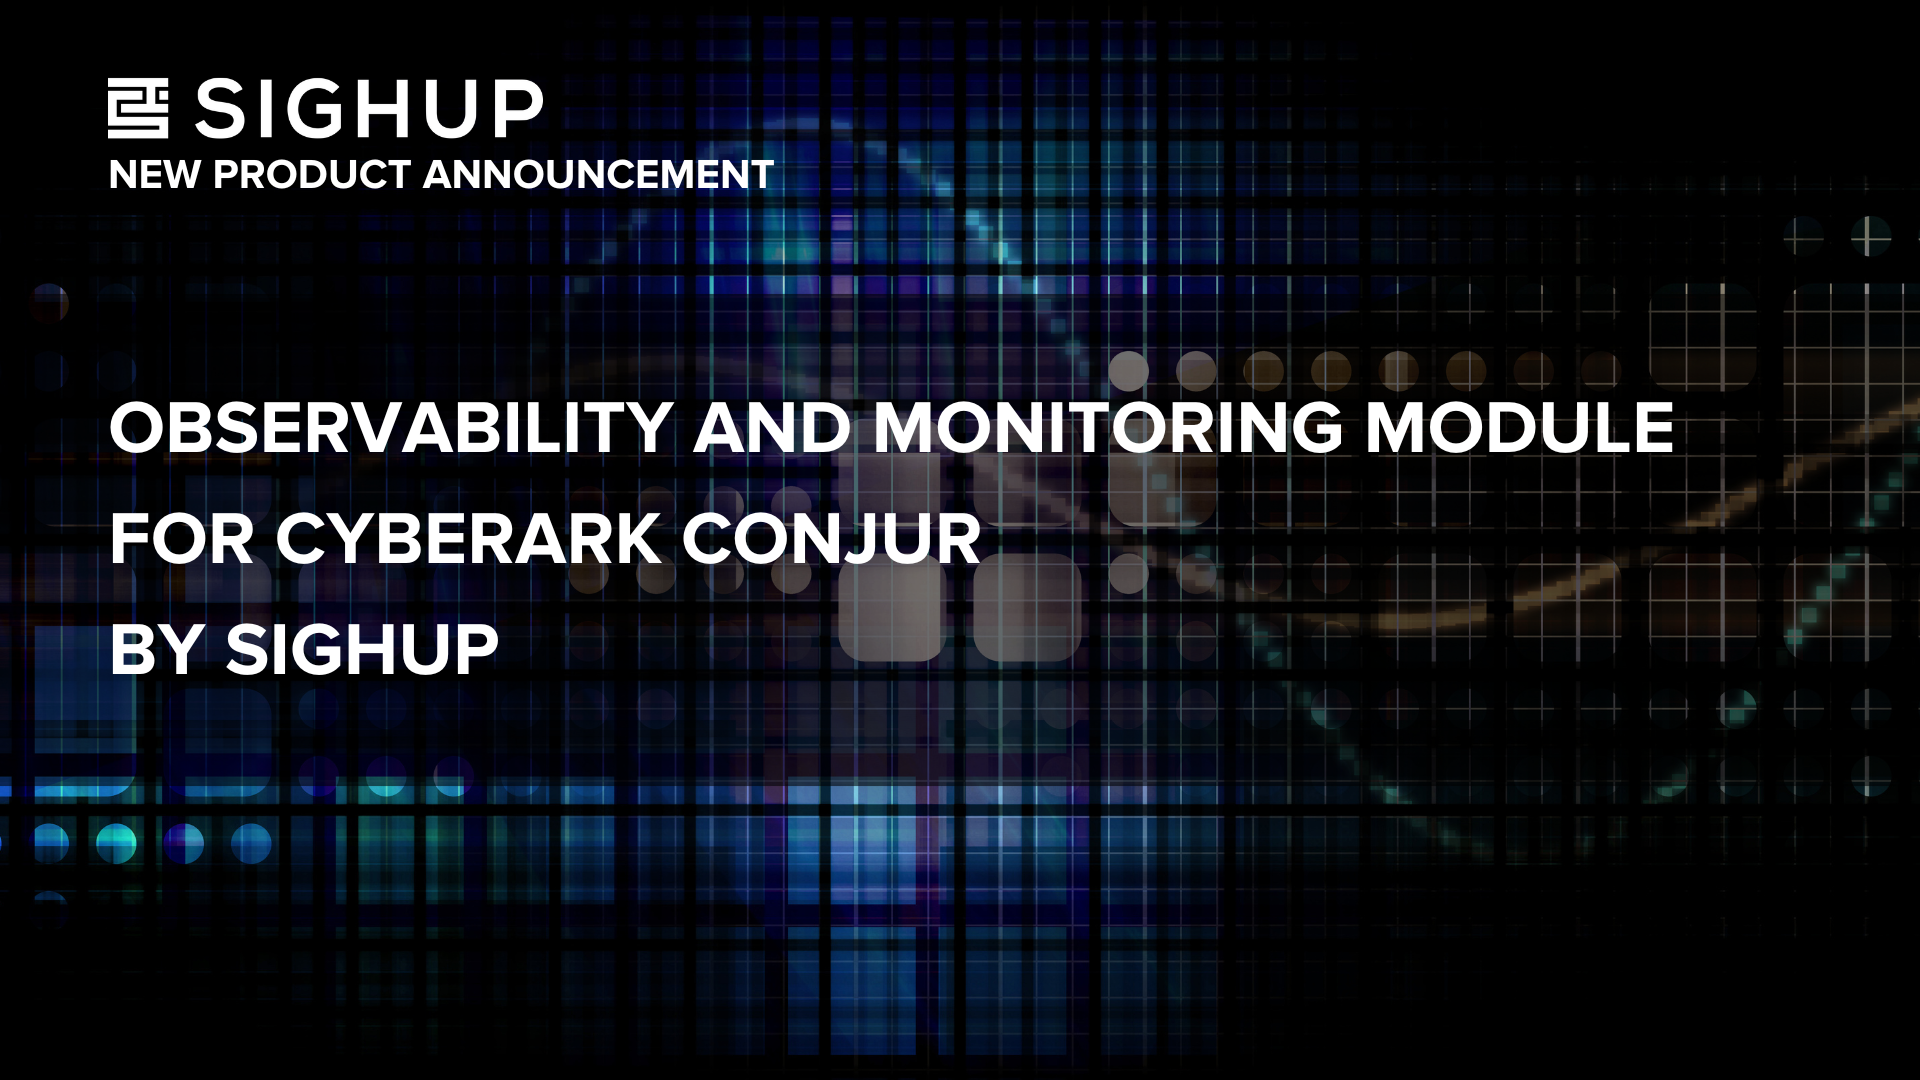 Introducing the Observability and Monitoring Module for CyberArk Conjur by SIGHUP